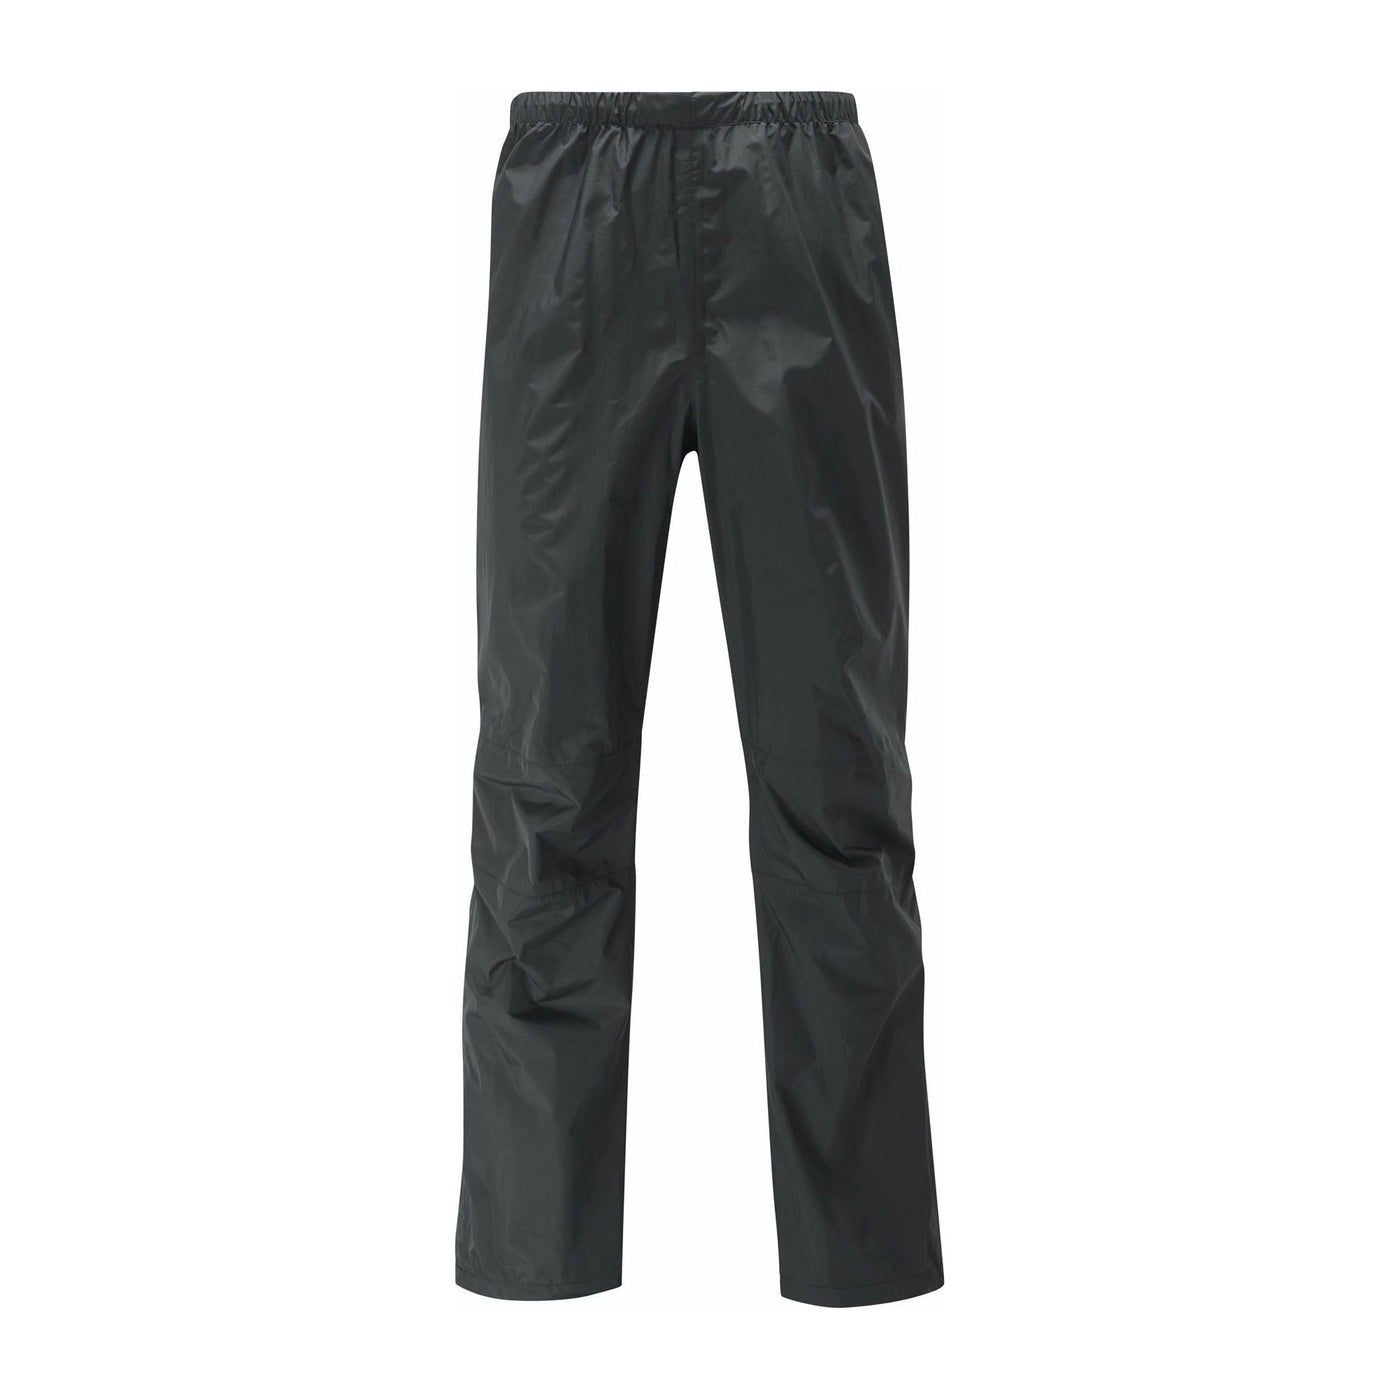 Packaway Overpants - Natural Authentic